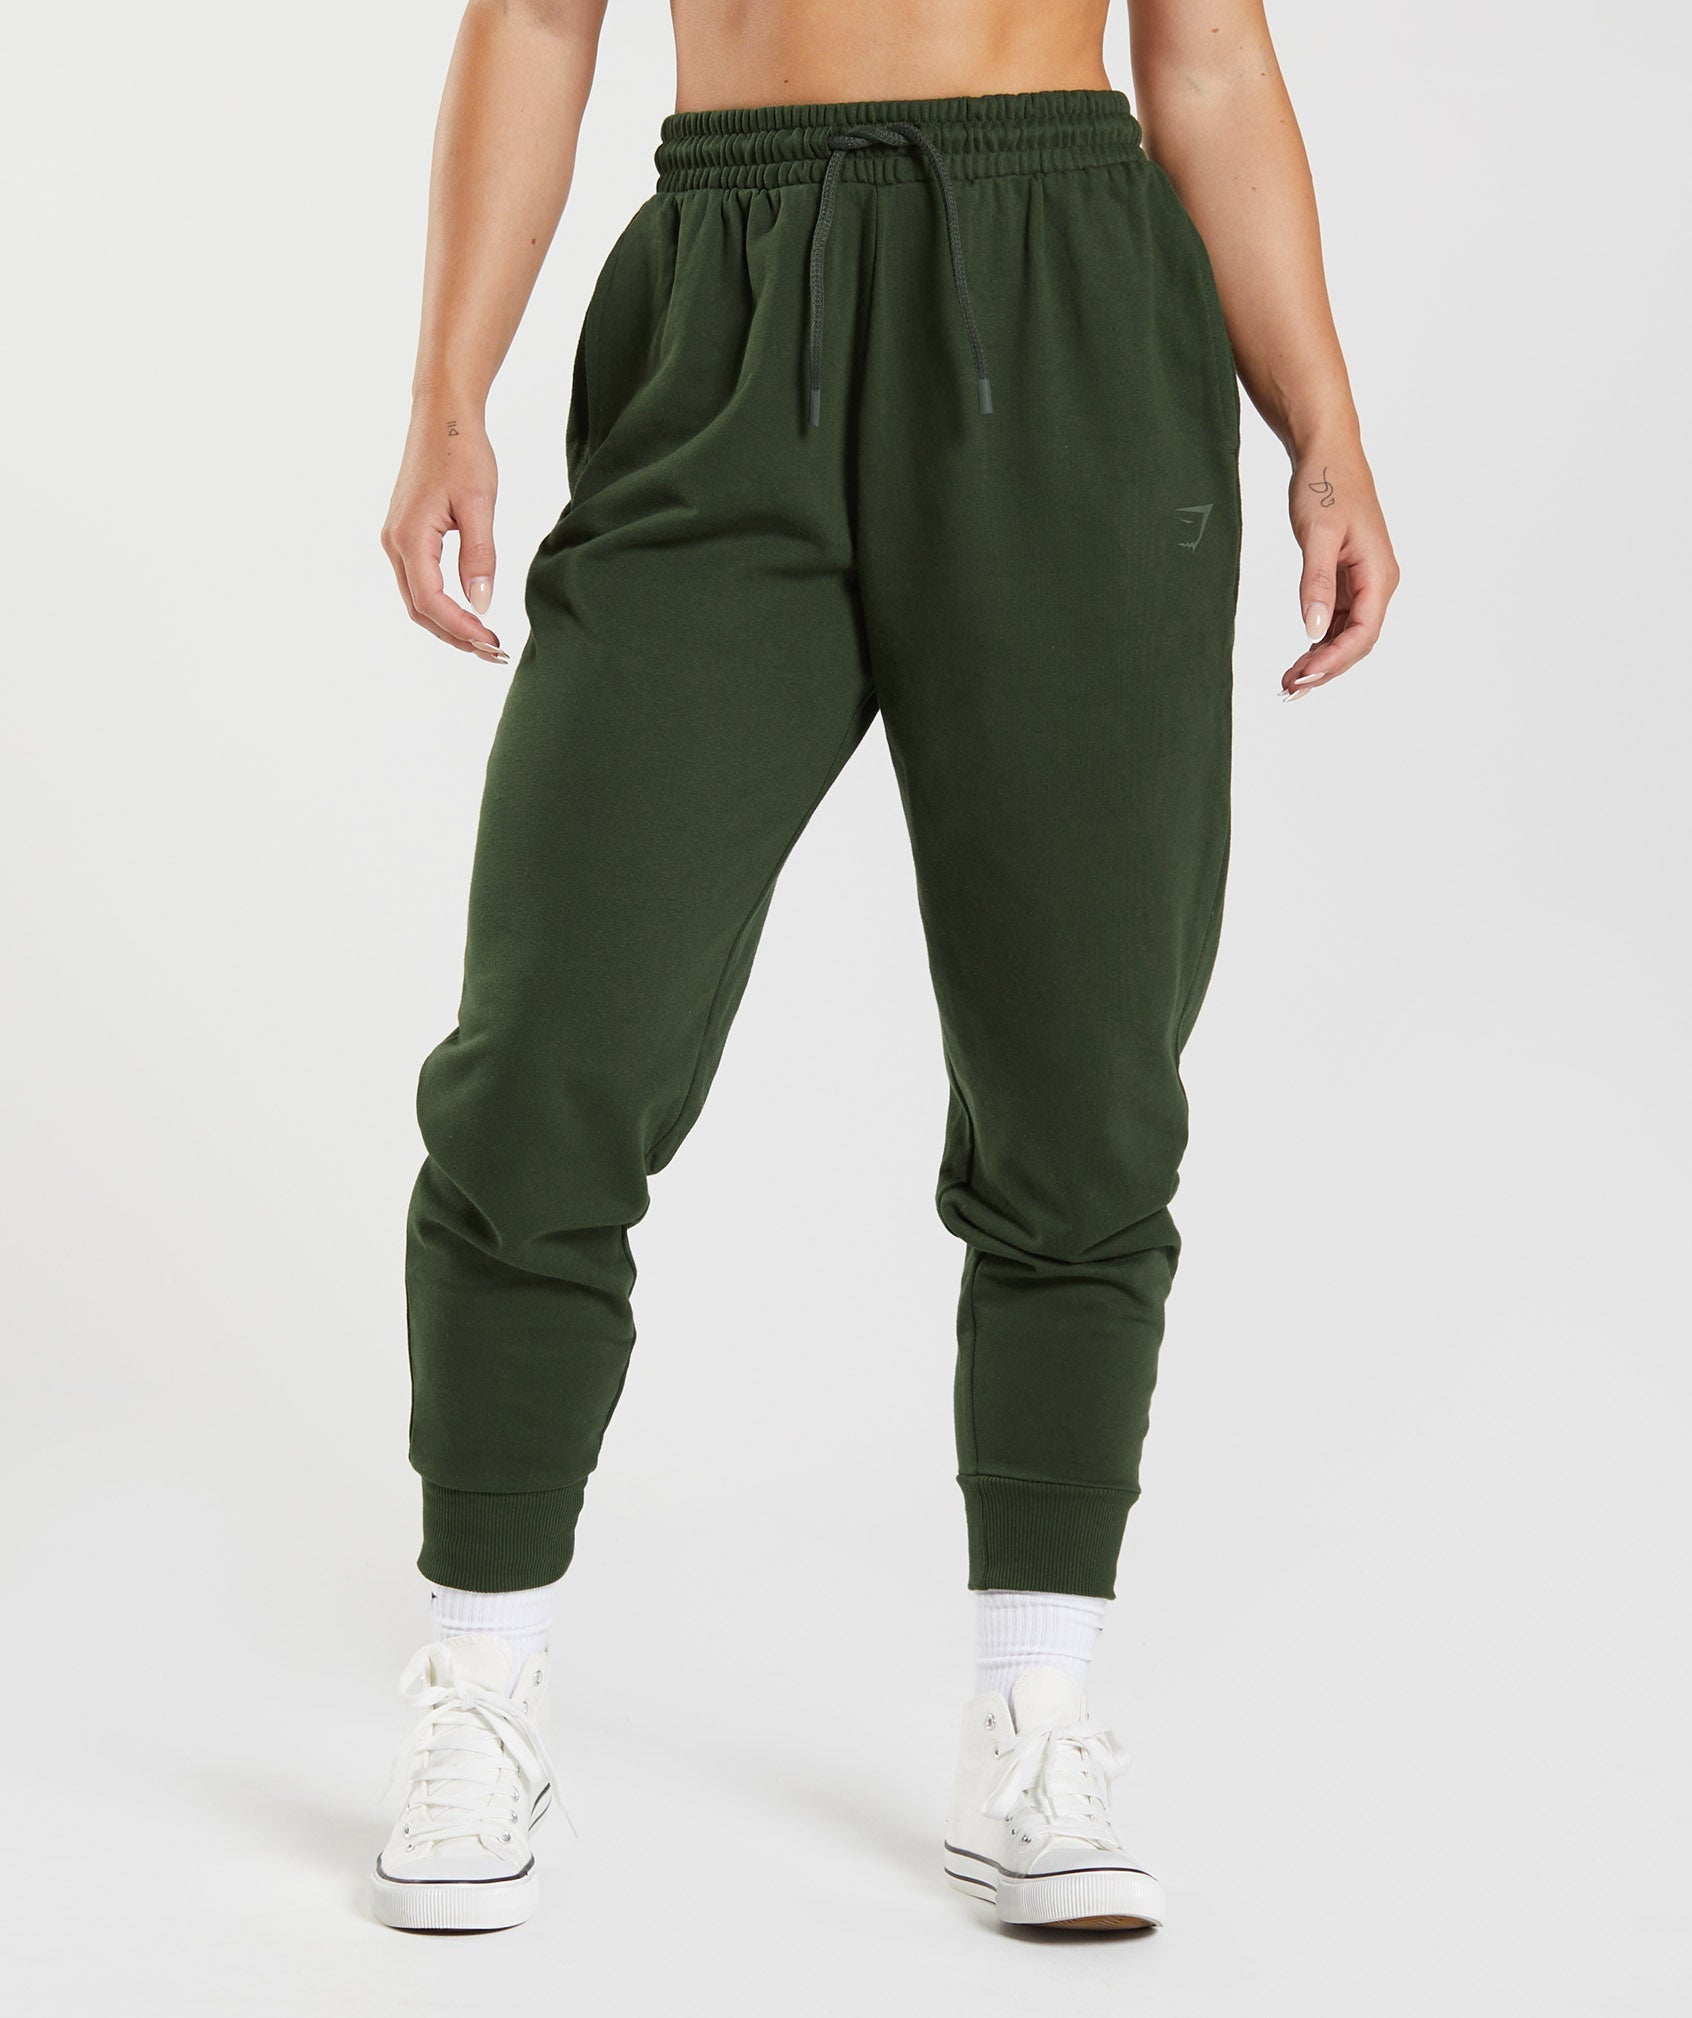 GS Power Joggers in Moss Olive - view 1